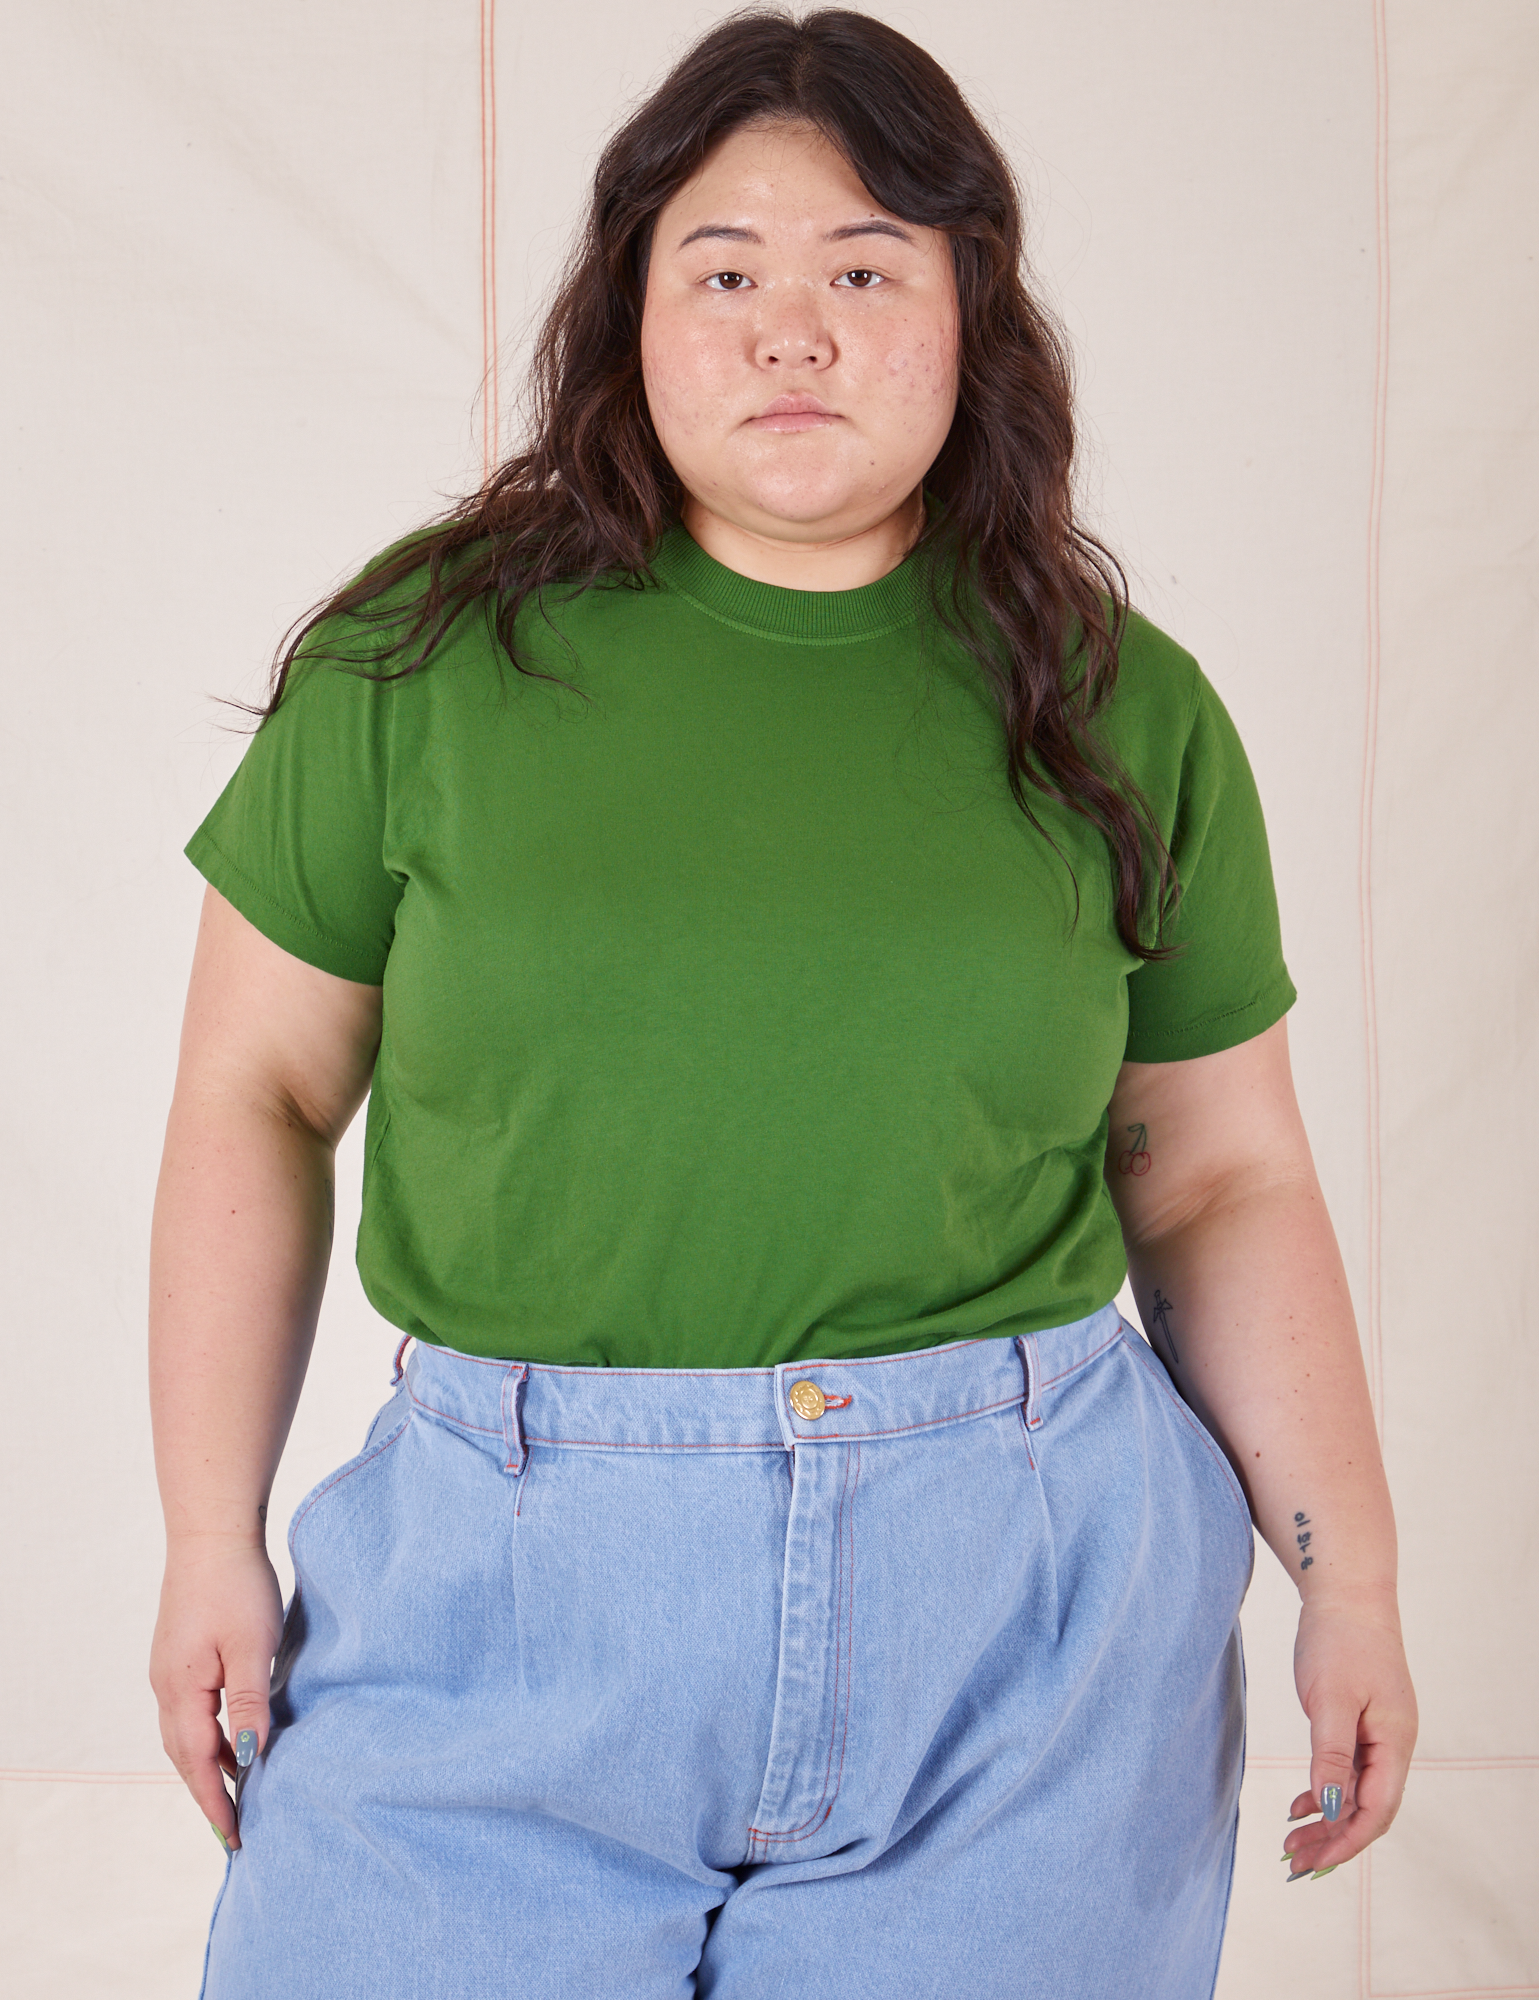 Ashley is wearing Organic Vintage Tee in Lawn Green tucked into light wash Trouser Jeans